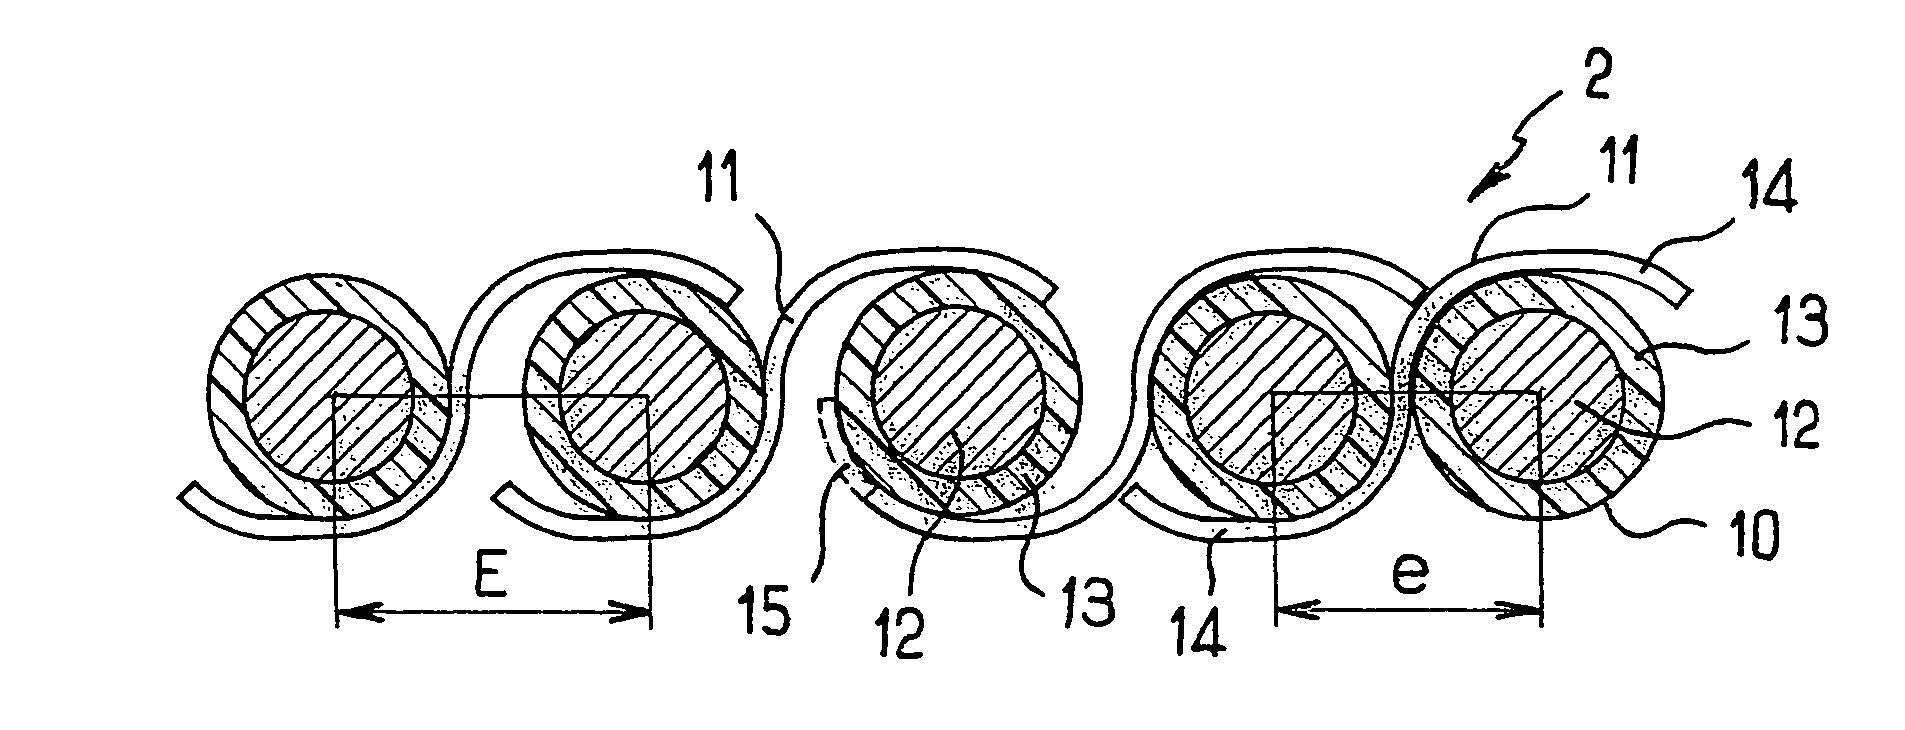 Flexible tubular pipe for hydrocarbon transport with carcass consisting of an elongated element stapled with a band iron